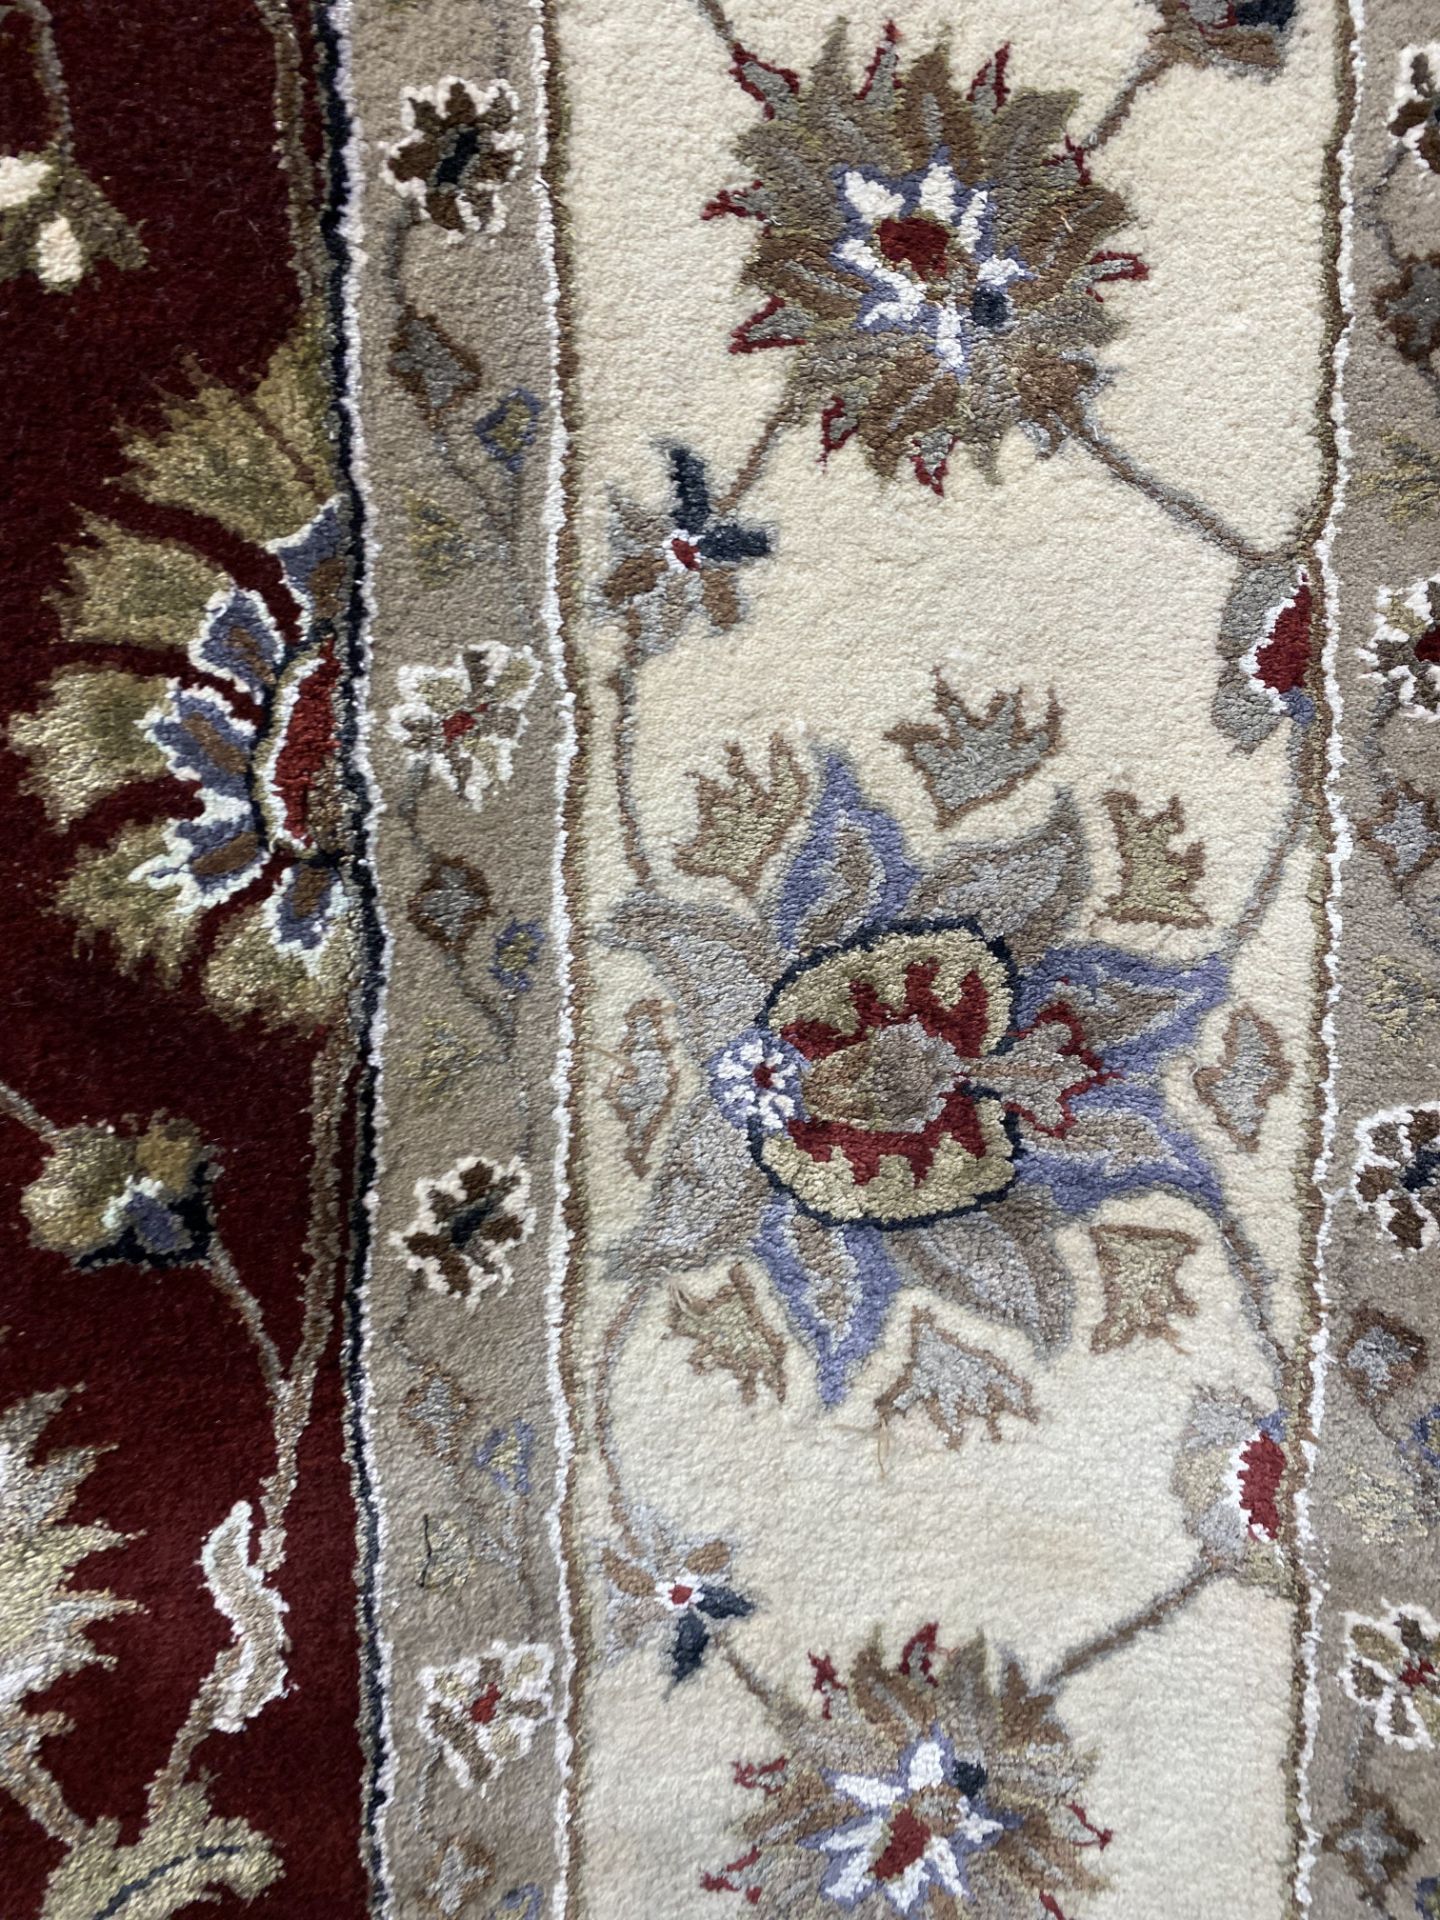 8' X 10' WOOL/A.SILK HAND TUFTED IN INDIA, MSRP $3,595, INVENTORY CODE LEGEND2IMAD922 D.RDWHT - Image 2 of 5